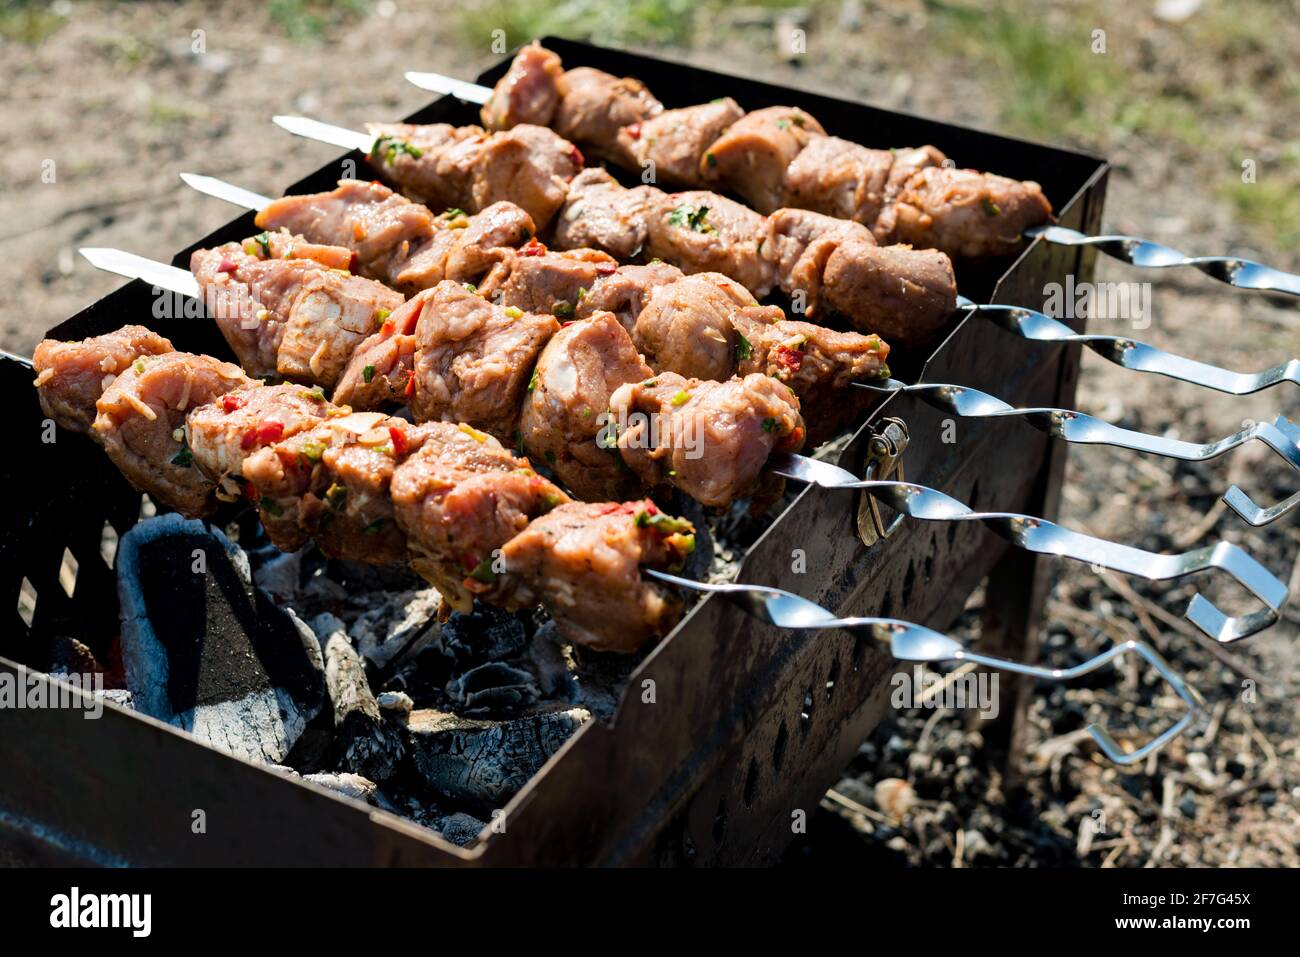 Raw shish kebab on skewers, outdoor meal. Close-up Stock Photo